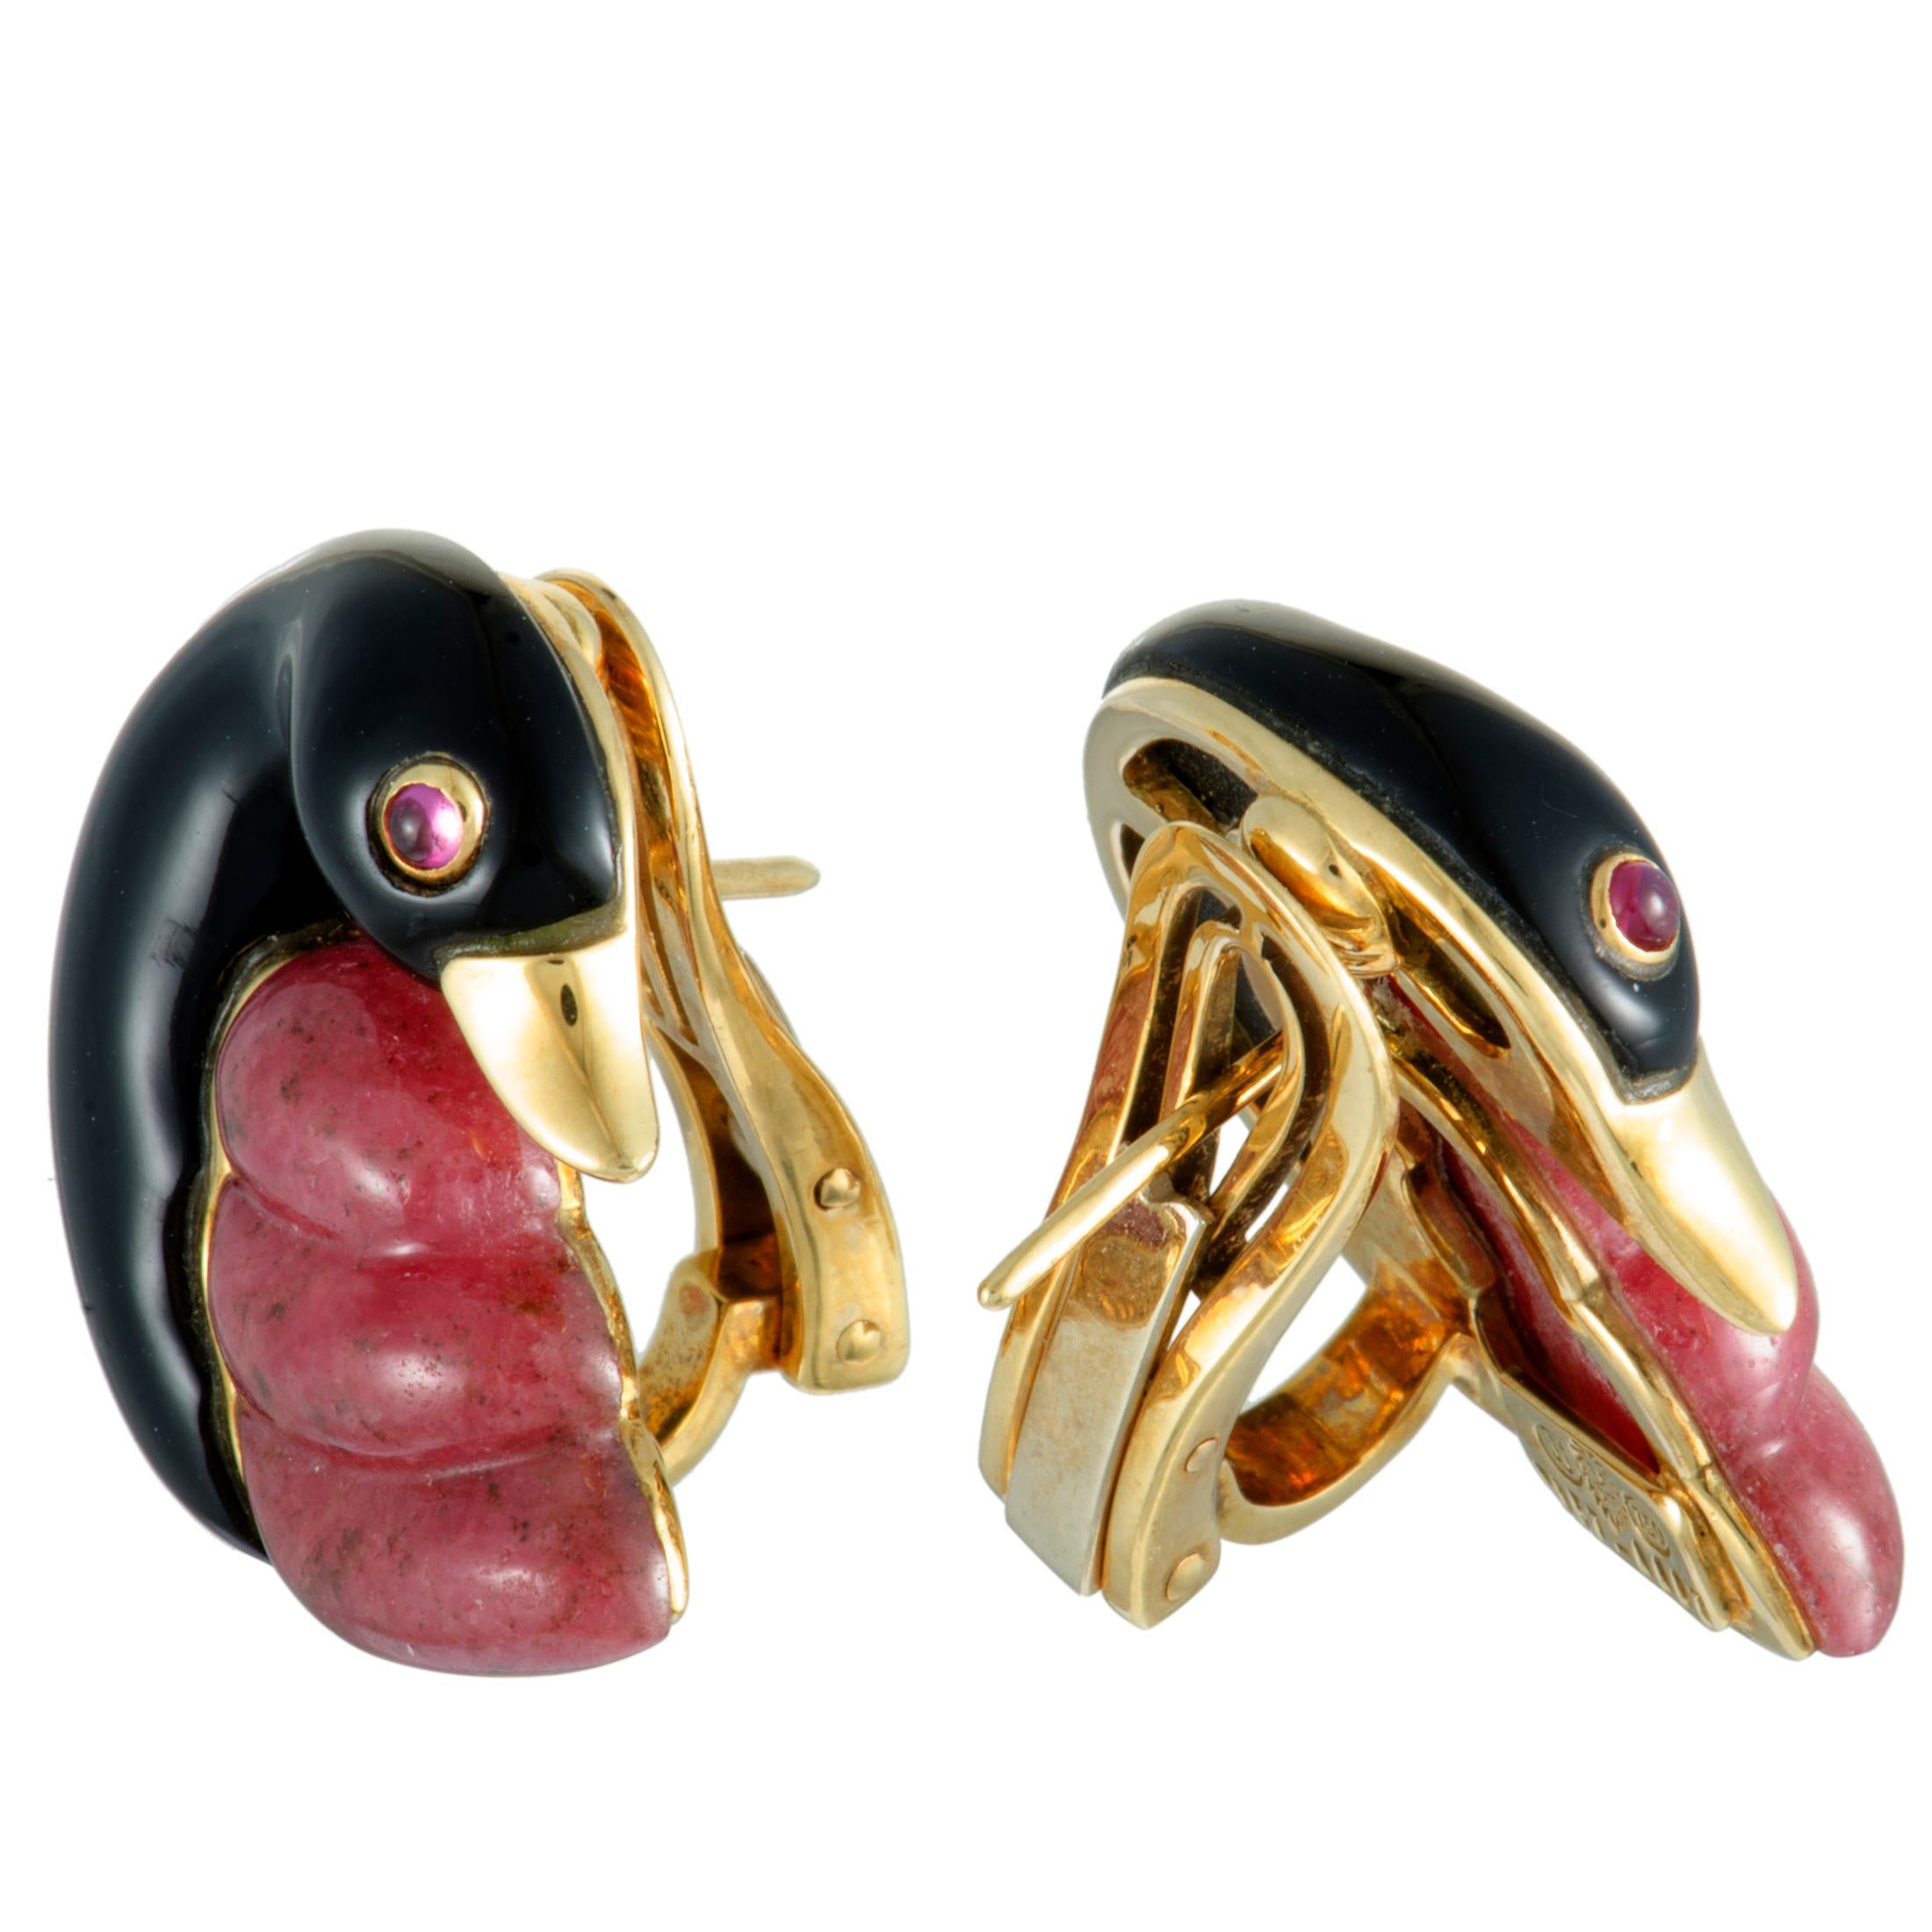 Beautifully designed to represent two gorgeously graceful swans, these exceptional Dominique Arpels earrings will add an attractive accent to any outfit of yours. The pair is expertly made of 18K yellow gold and decorated with ruby, onyx, and pink